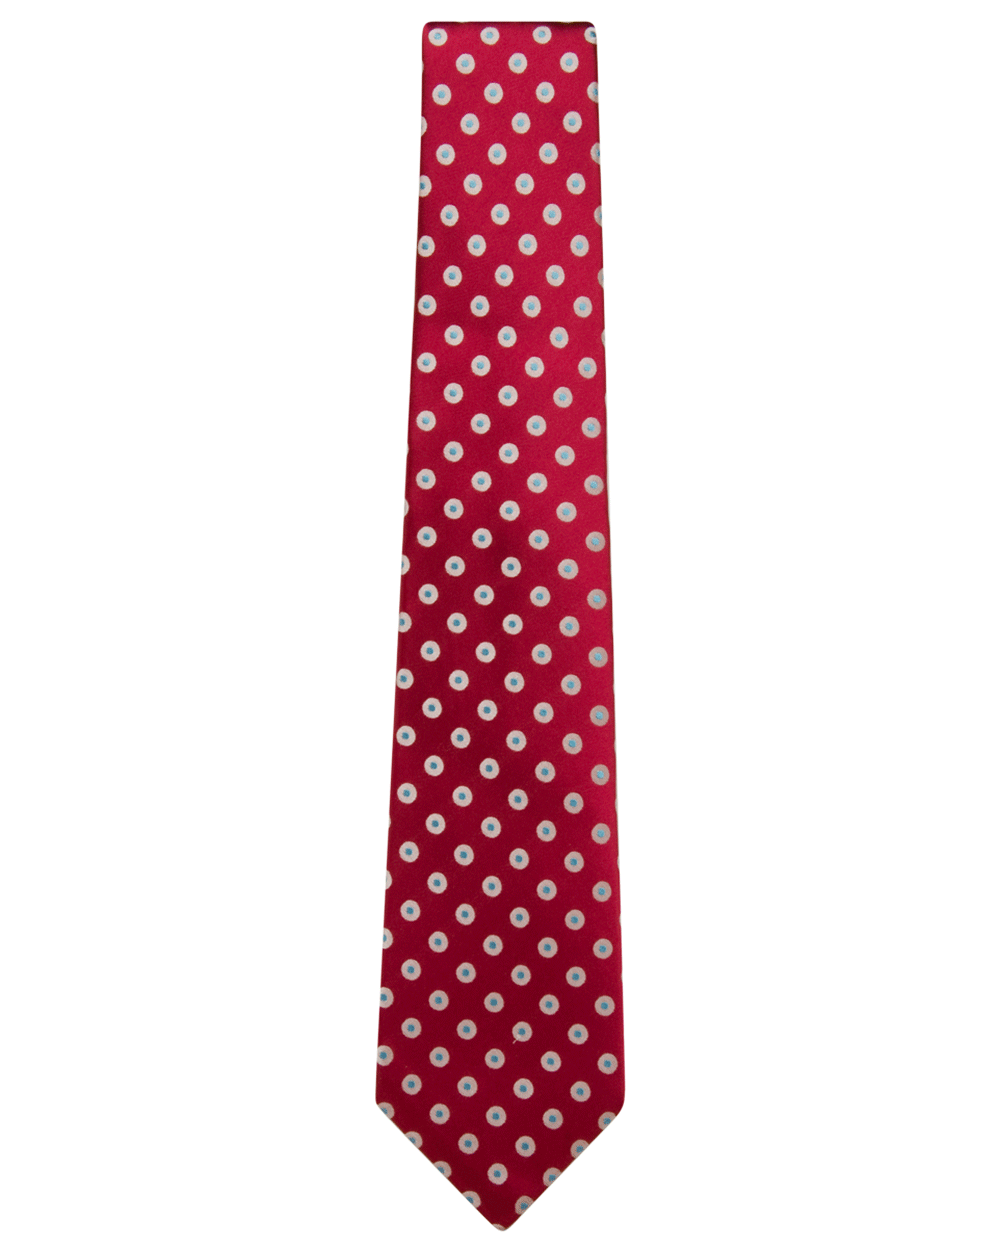 Burgundy and Silver Dotted Tie